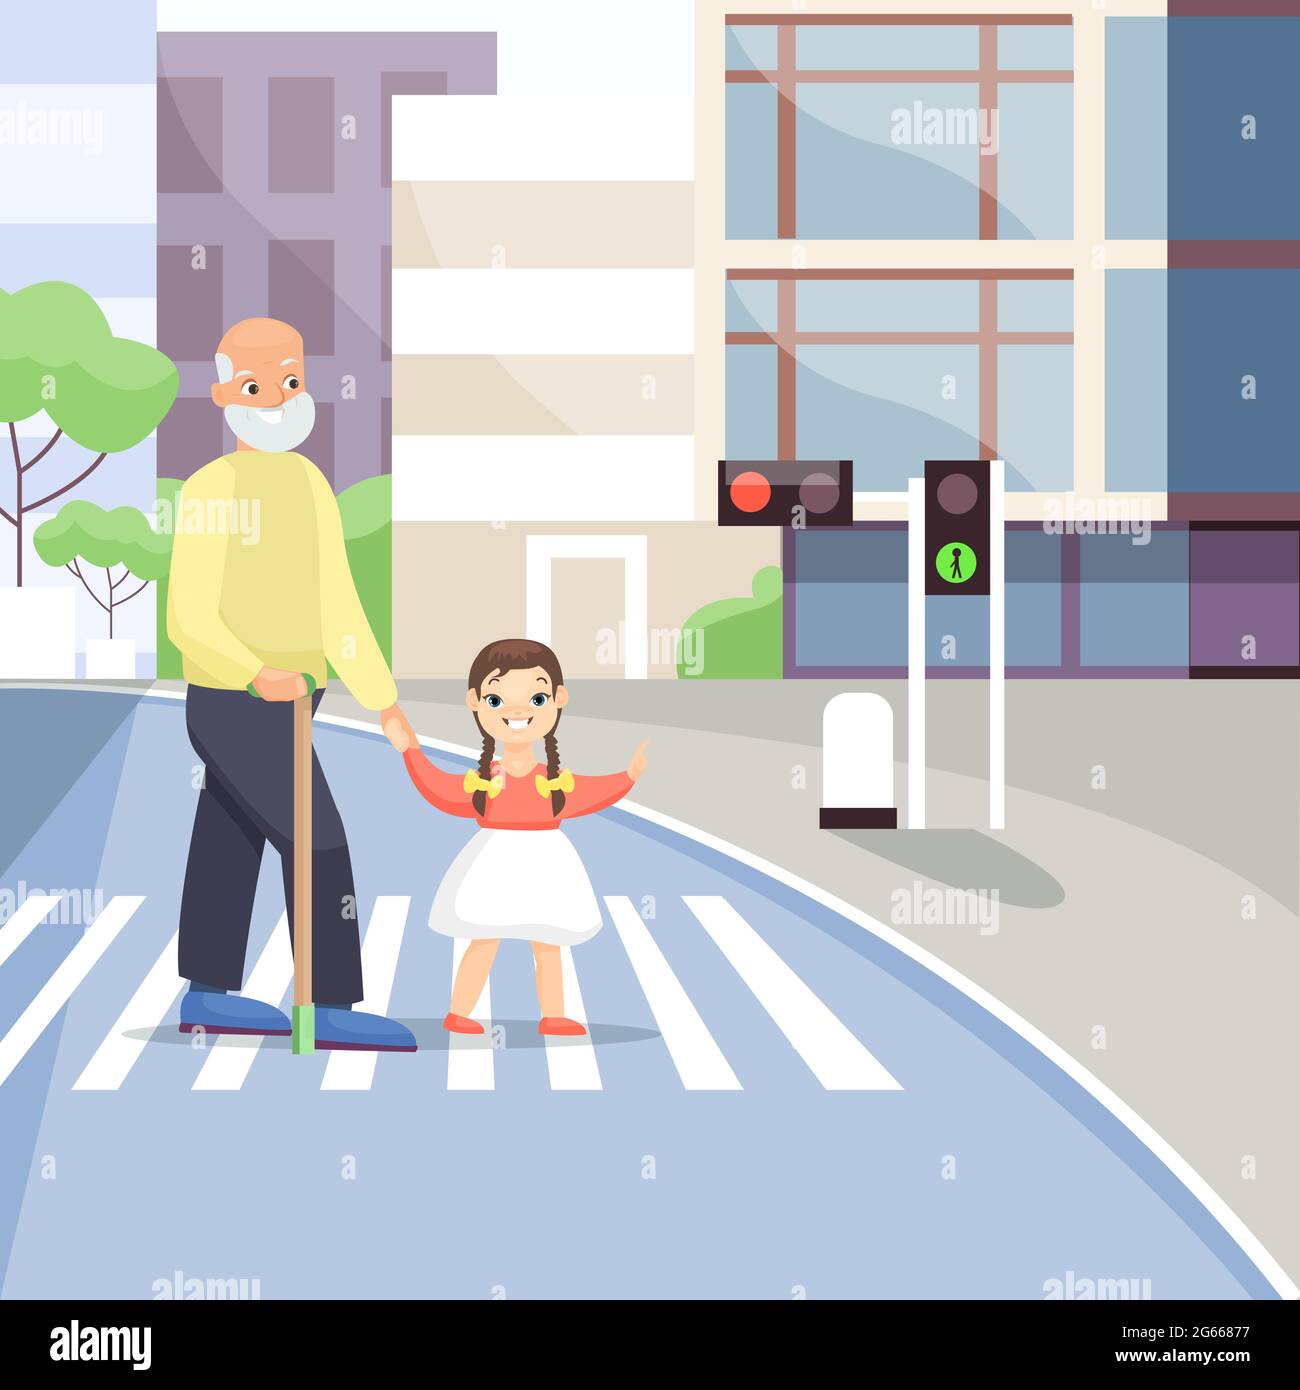 Old man crossing street flat vector illustration. Crosswalk, traffic lights signal. Senior people assistance concept. Grandfather and little girl on Stock Vector